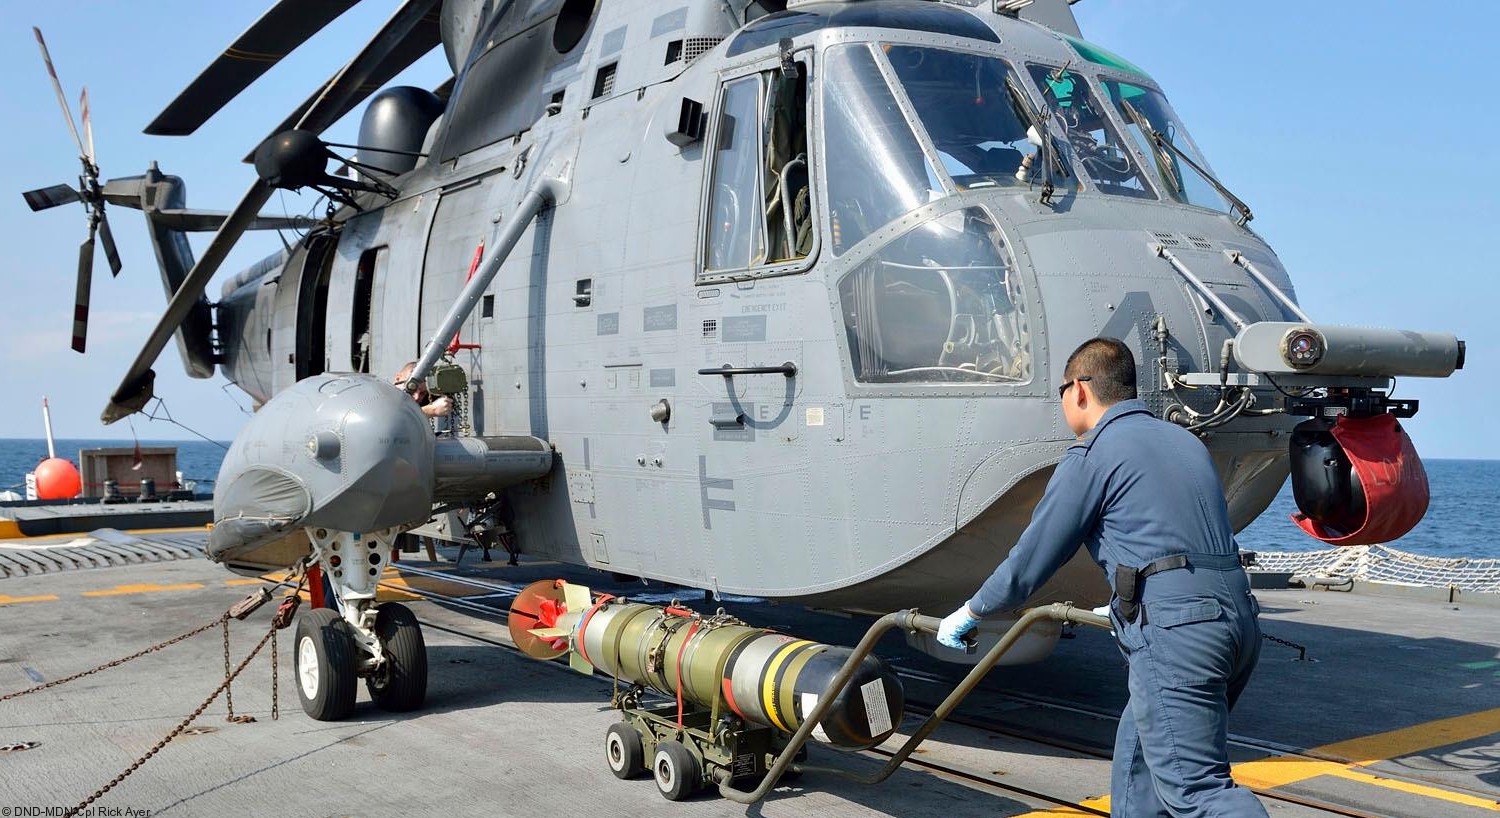 ch-124 sea king royal canadian navy sikorsky naval helicopter rcaf hmcs squadron 78 mk.46 torpedo